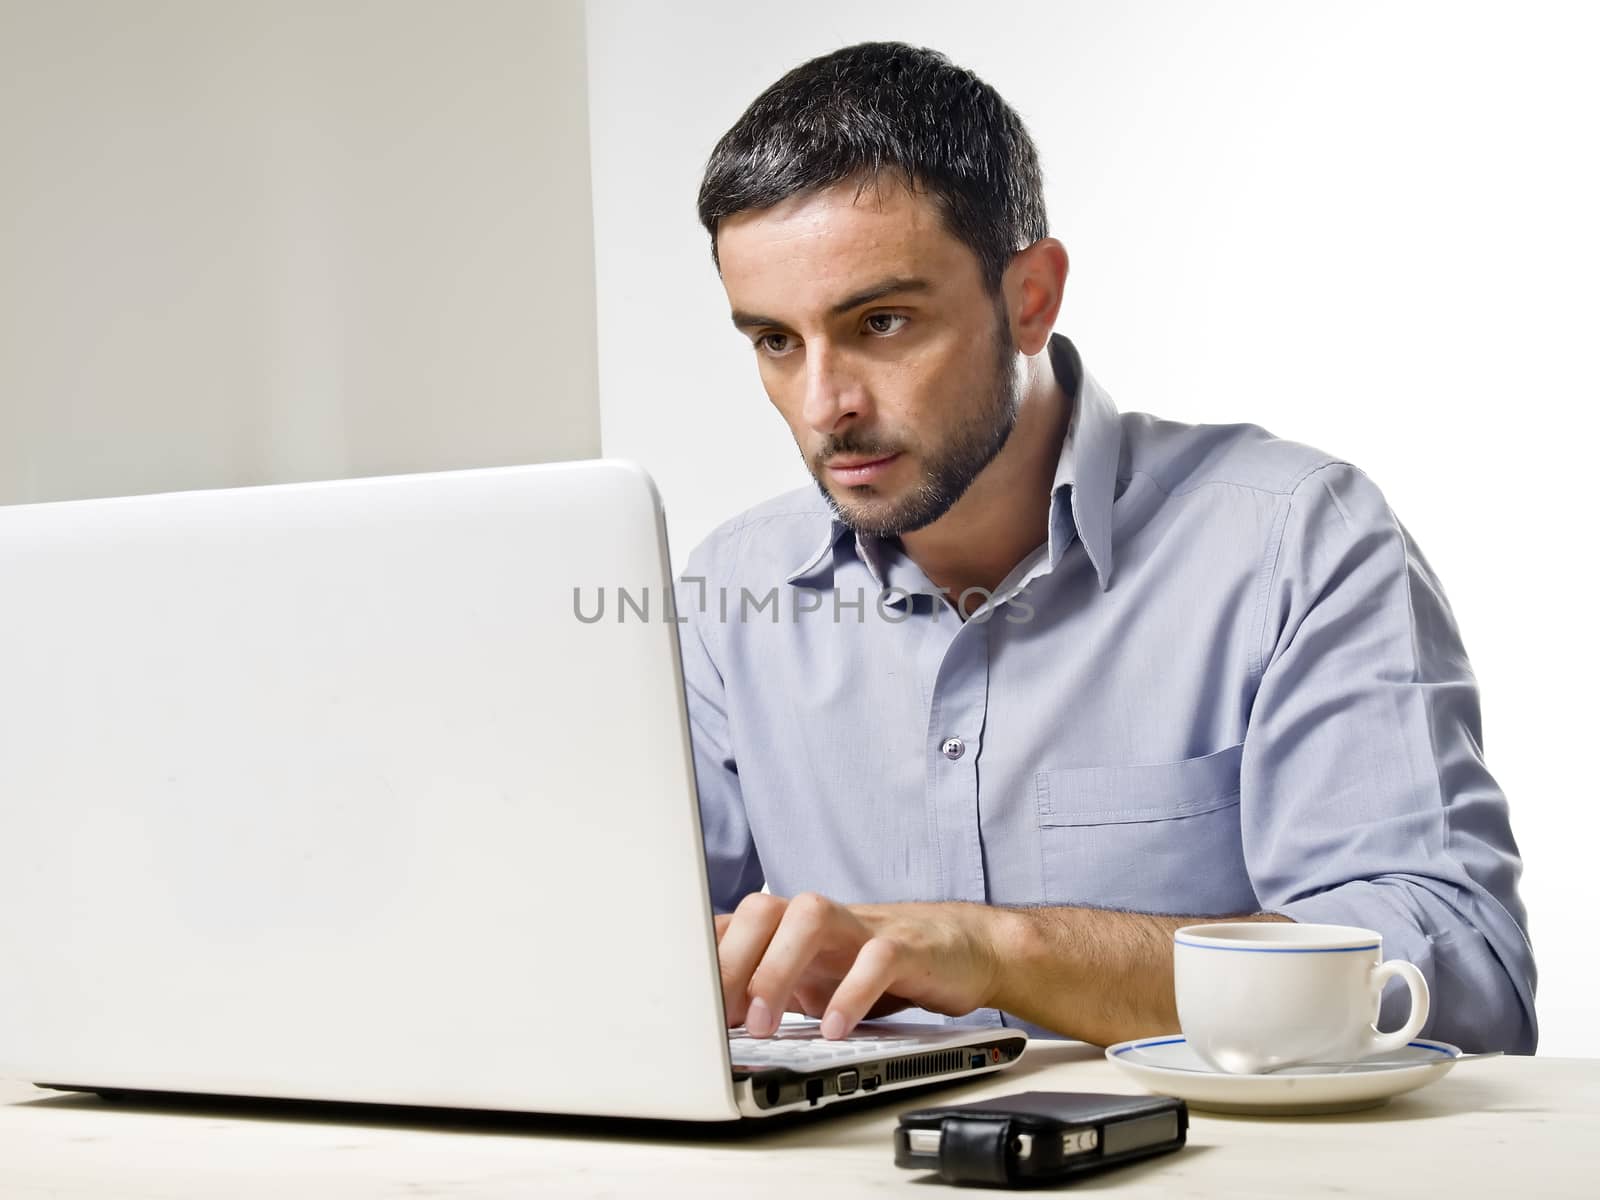 Young Man with Beard working on Laptop by ocusfocus